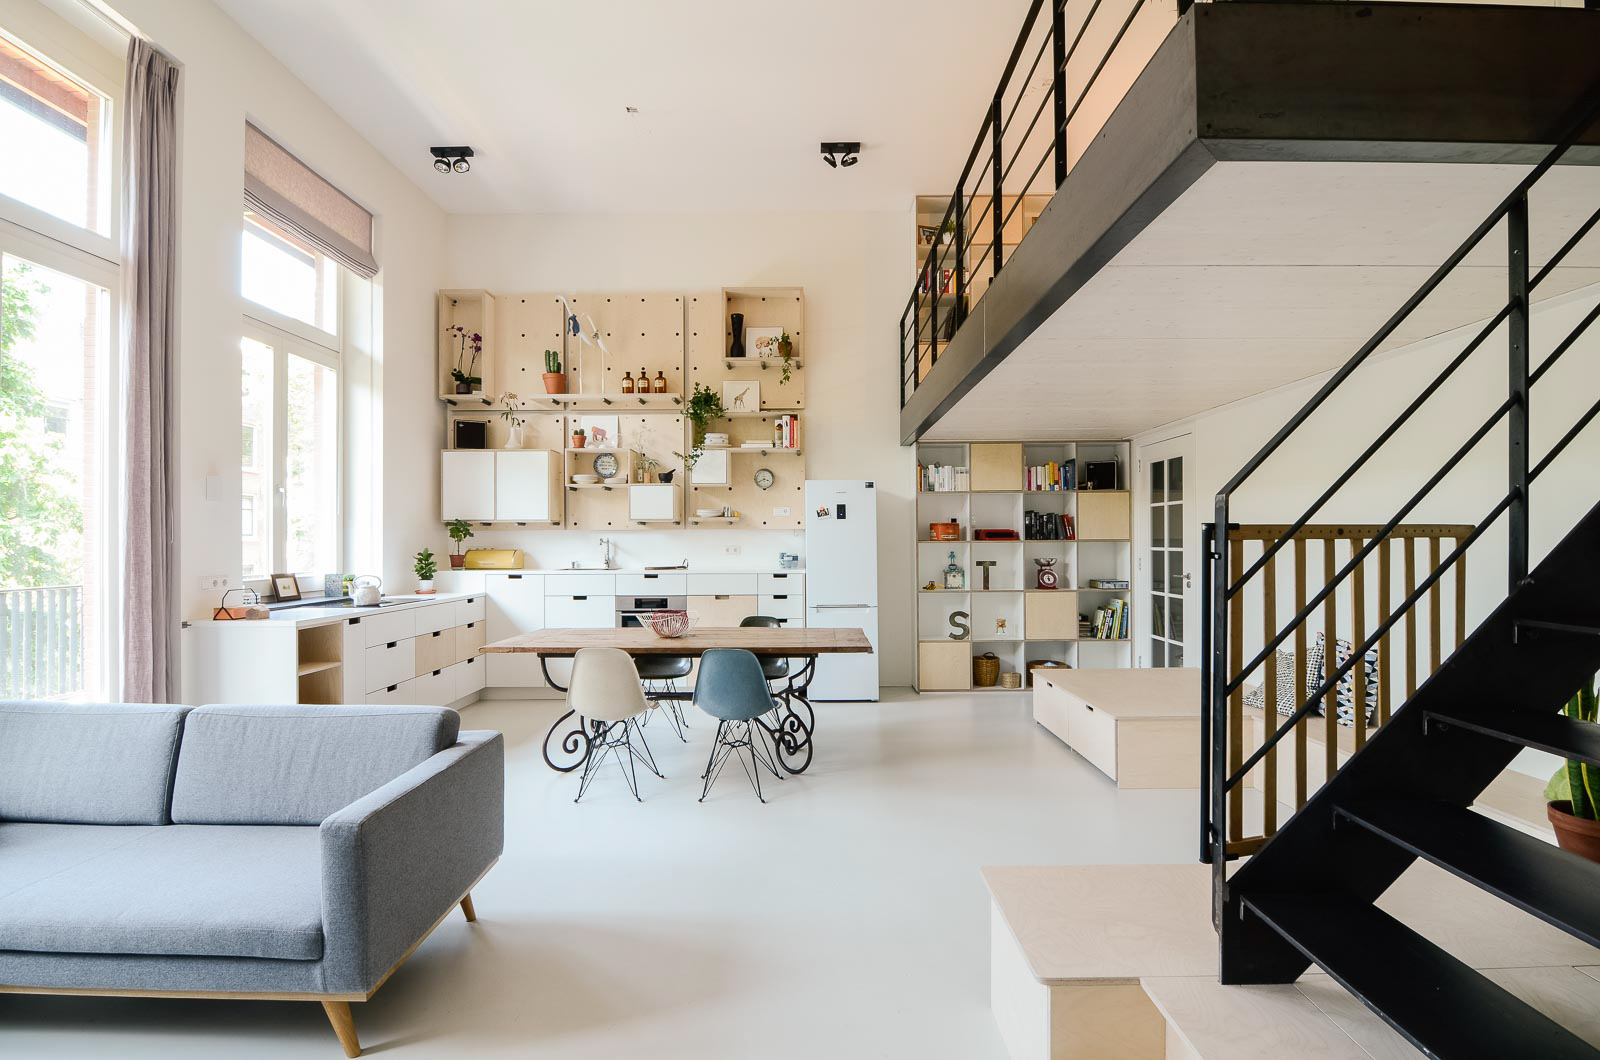 Old school conversion 'Ons dorp' Amsterdam by Standard Studio